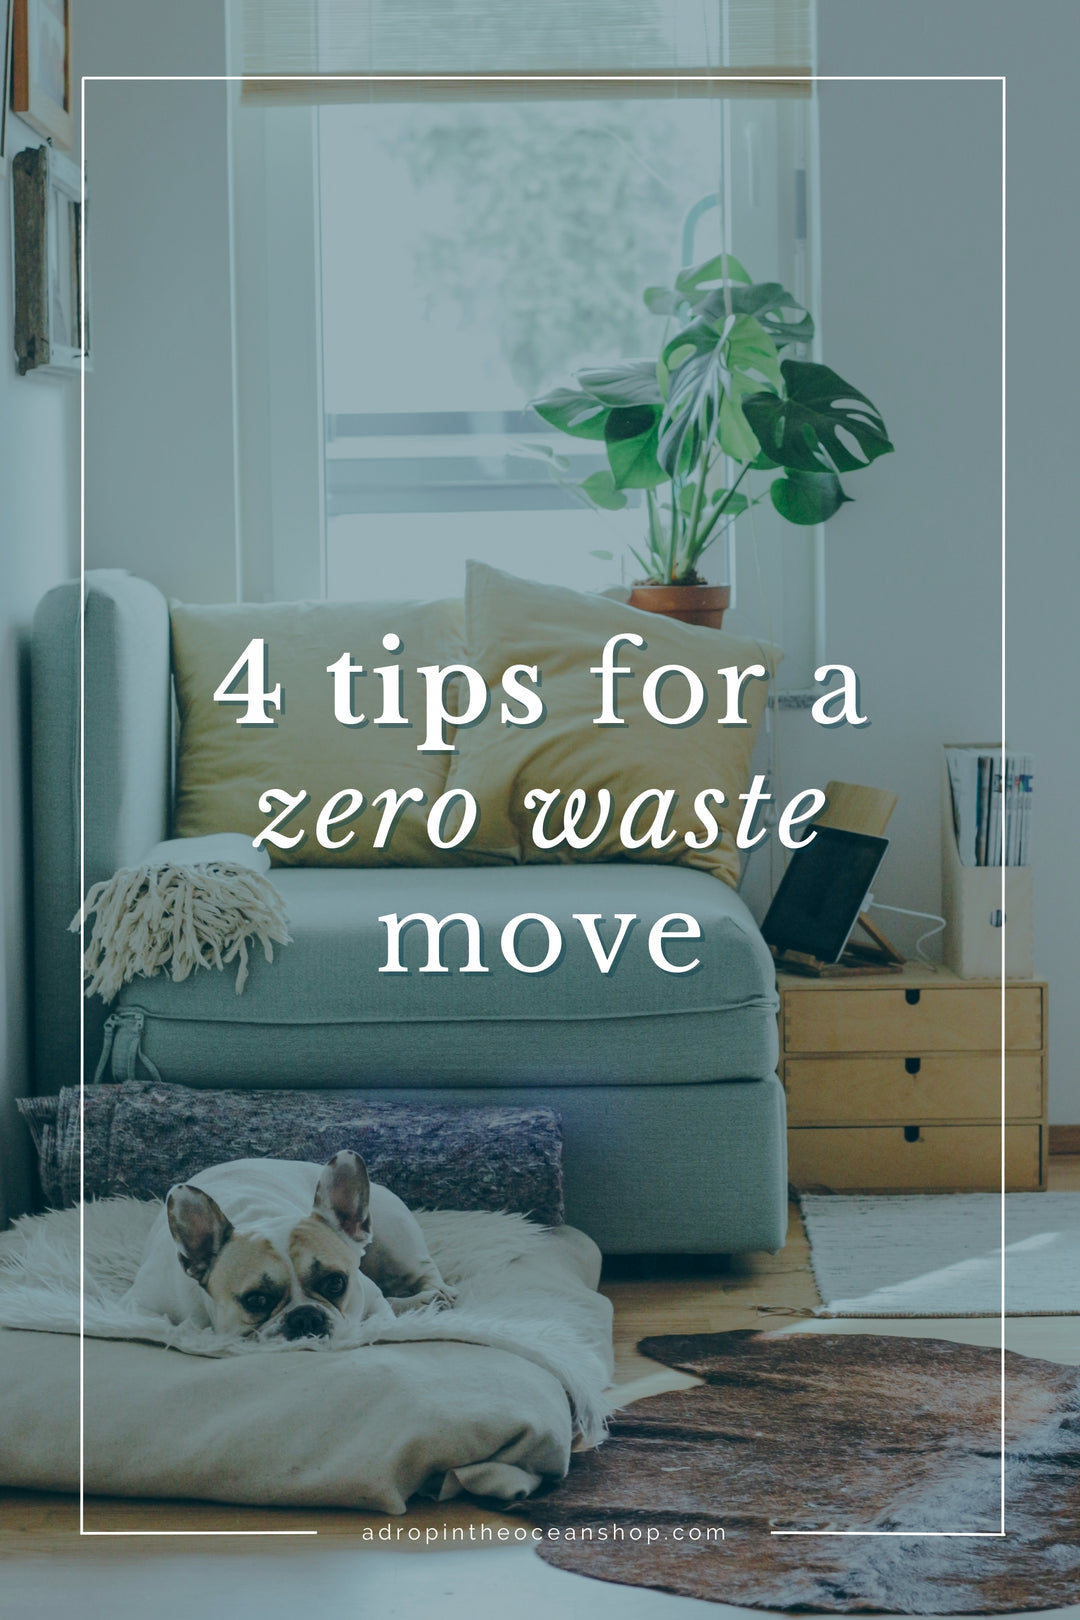 A Drop in the Ocean Blog: 4 Tips for a Zero Waste Move